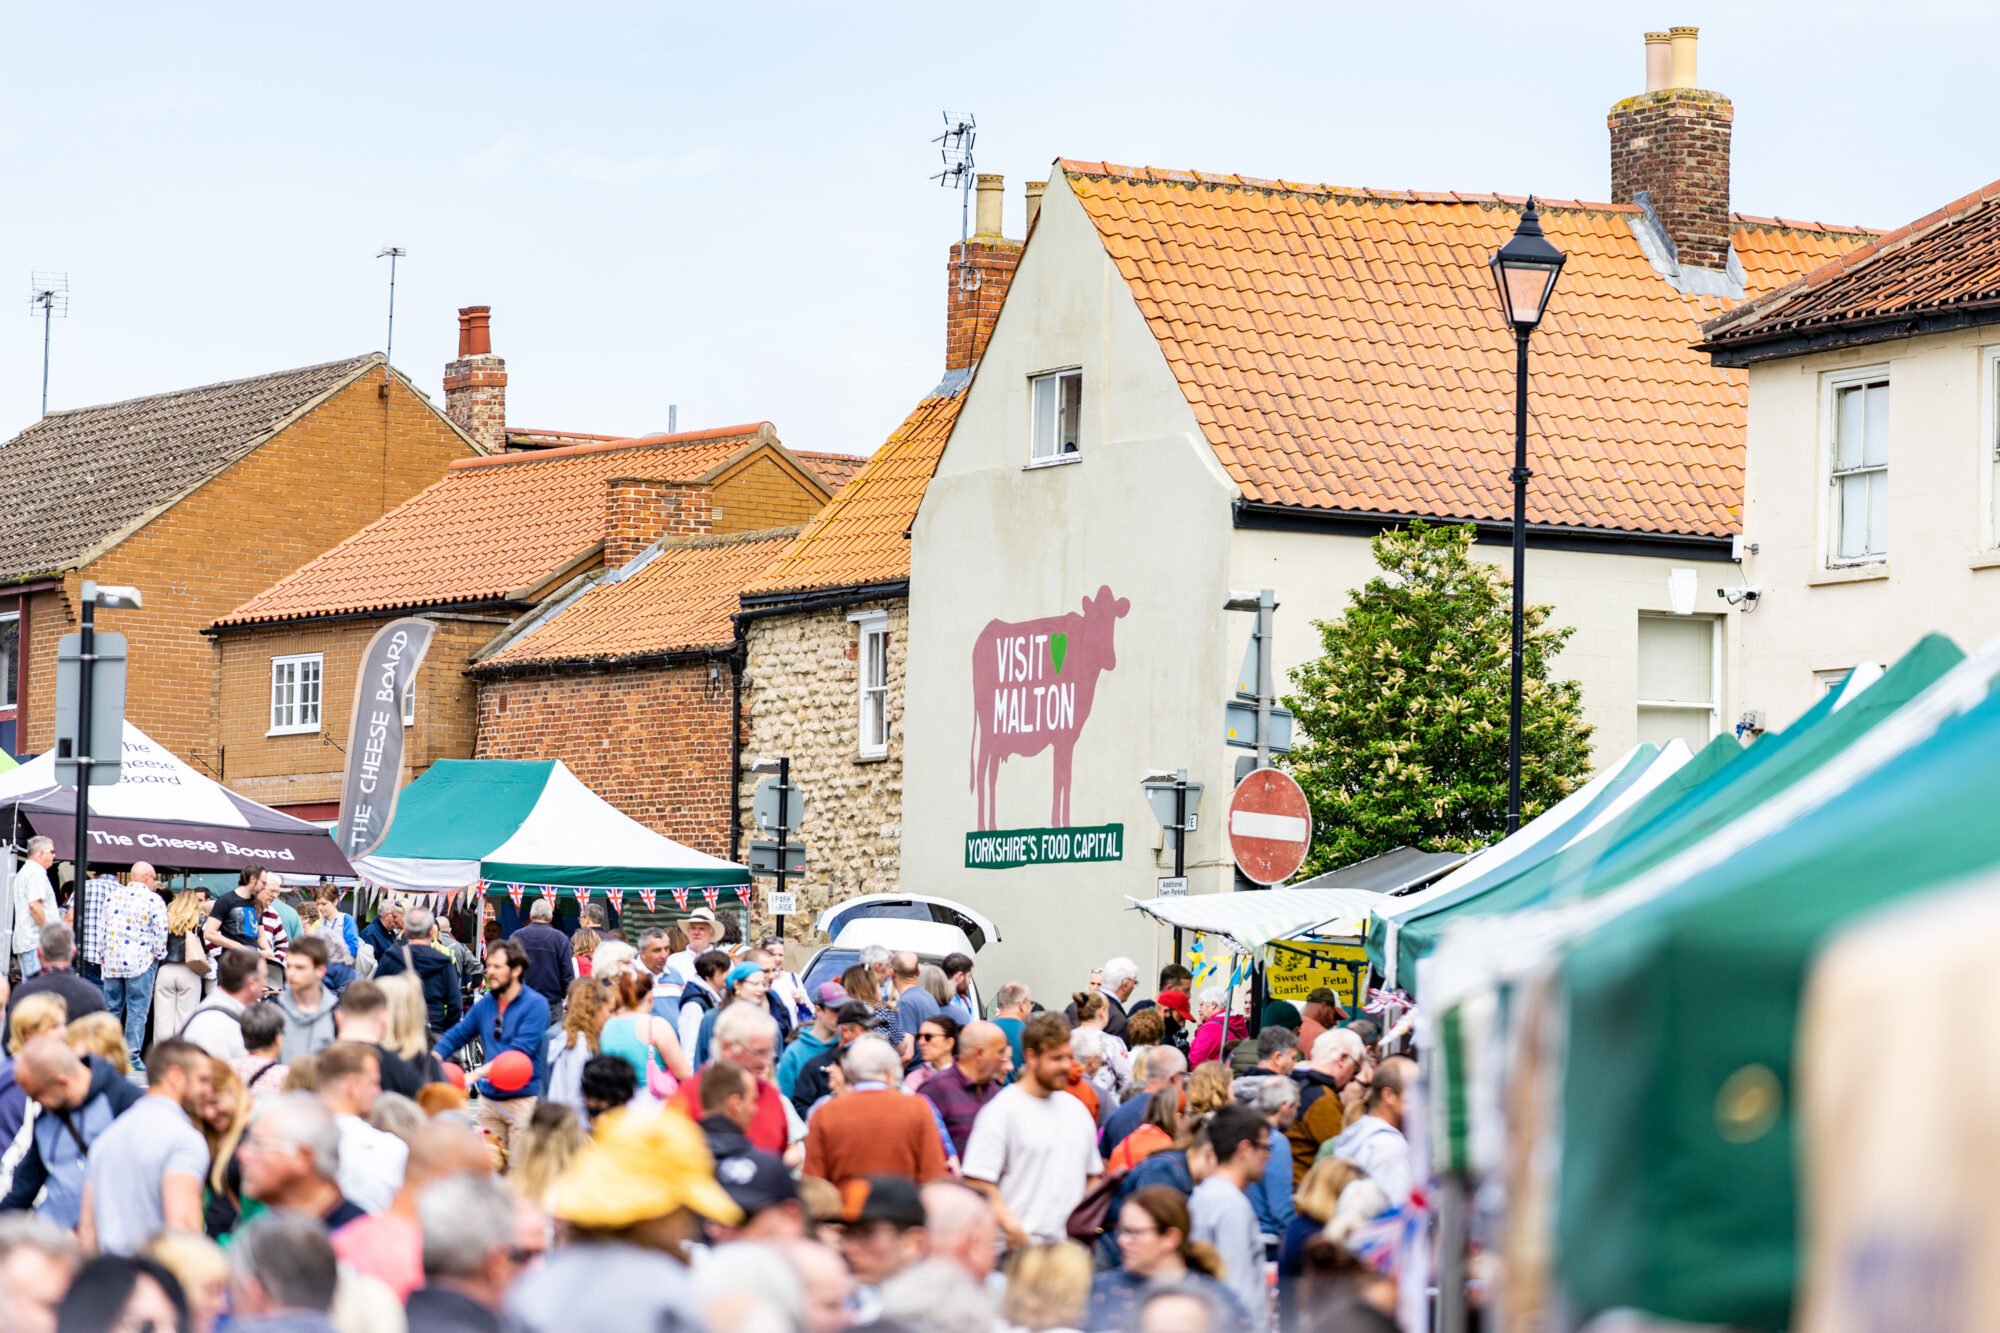 Image name Crowds Market Place East. Malton Food Festival 3 June 2022. Photo Credit milnerCreative on behalf of Visit Malton the 1 image from the post Malton Food Lovers Festival (Spring) in Yorkshire.com.